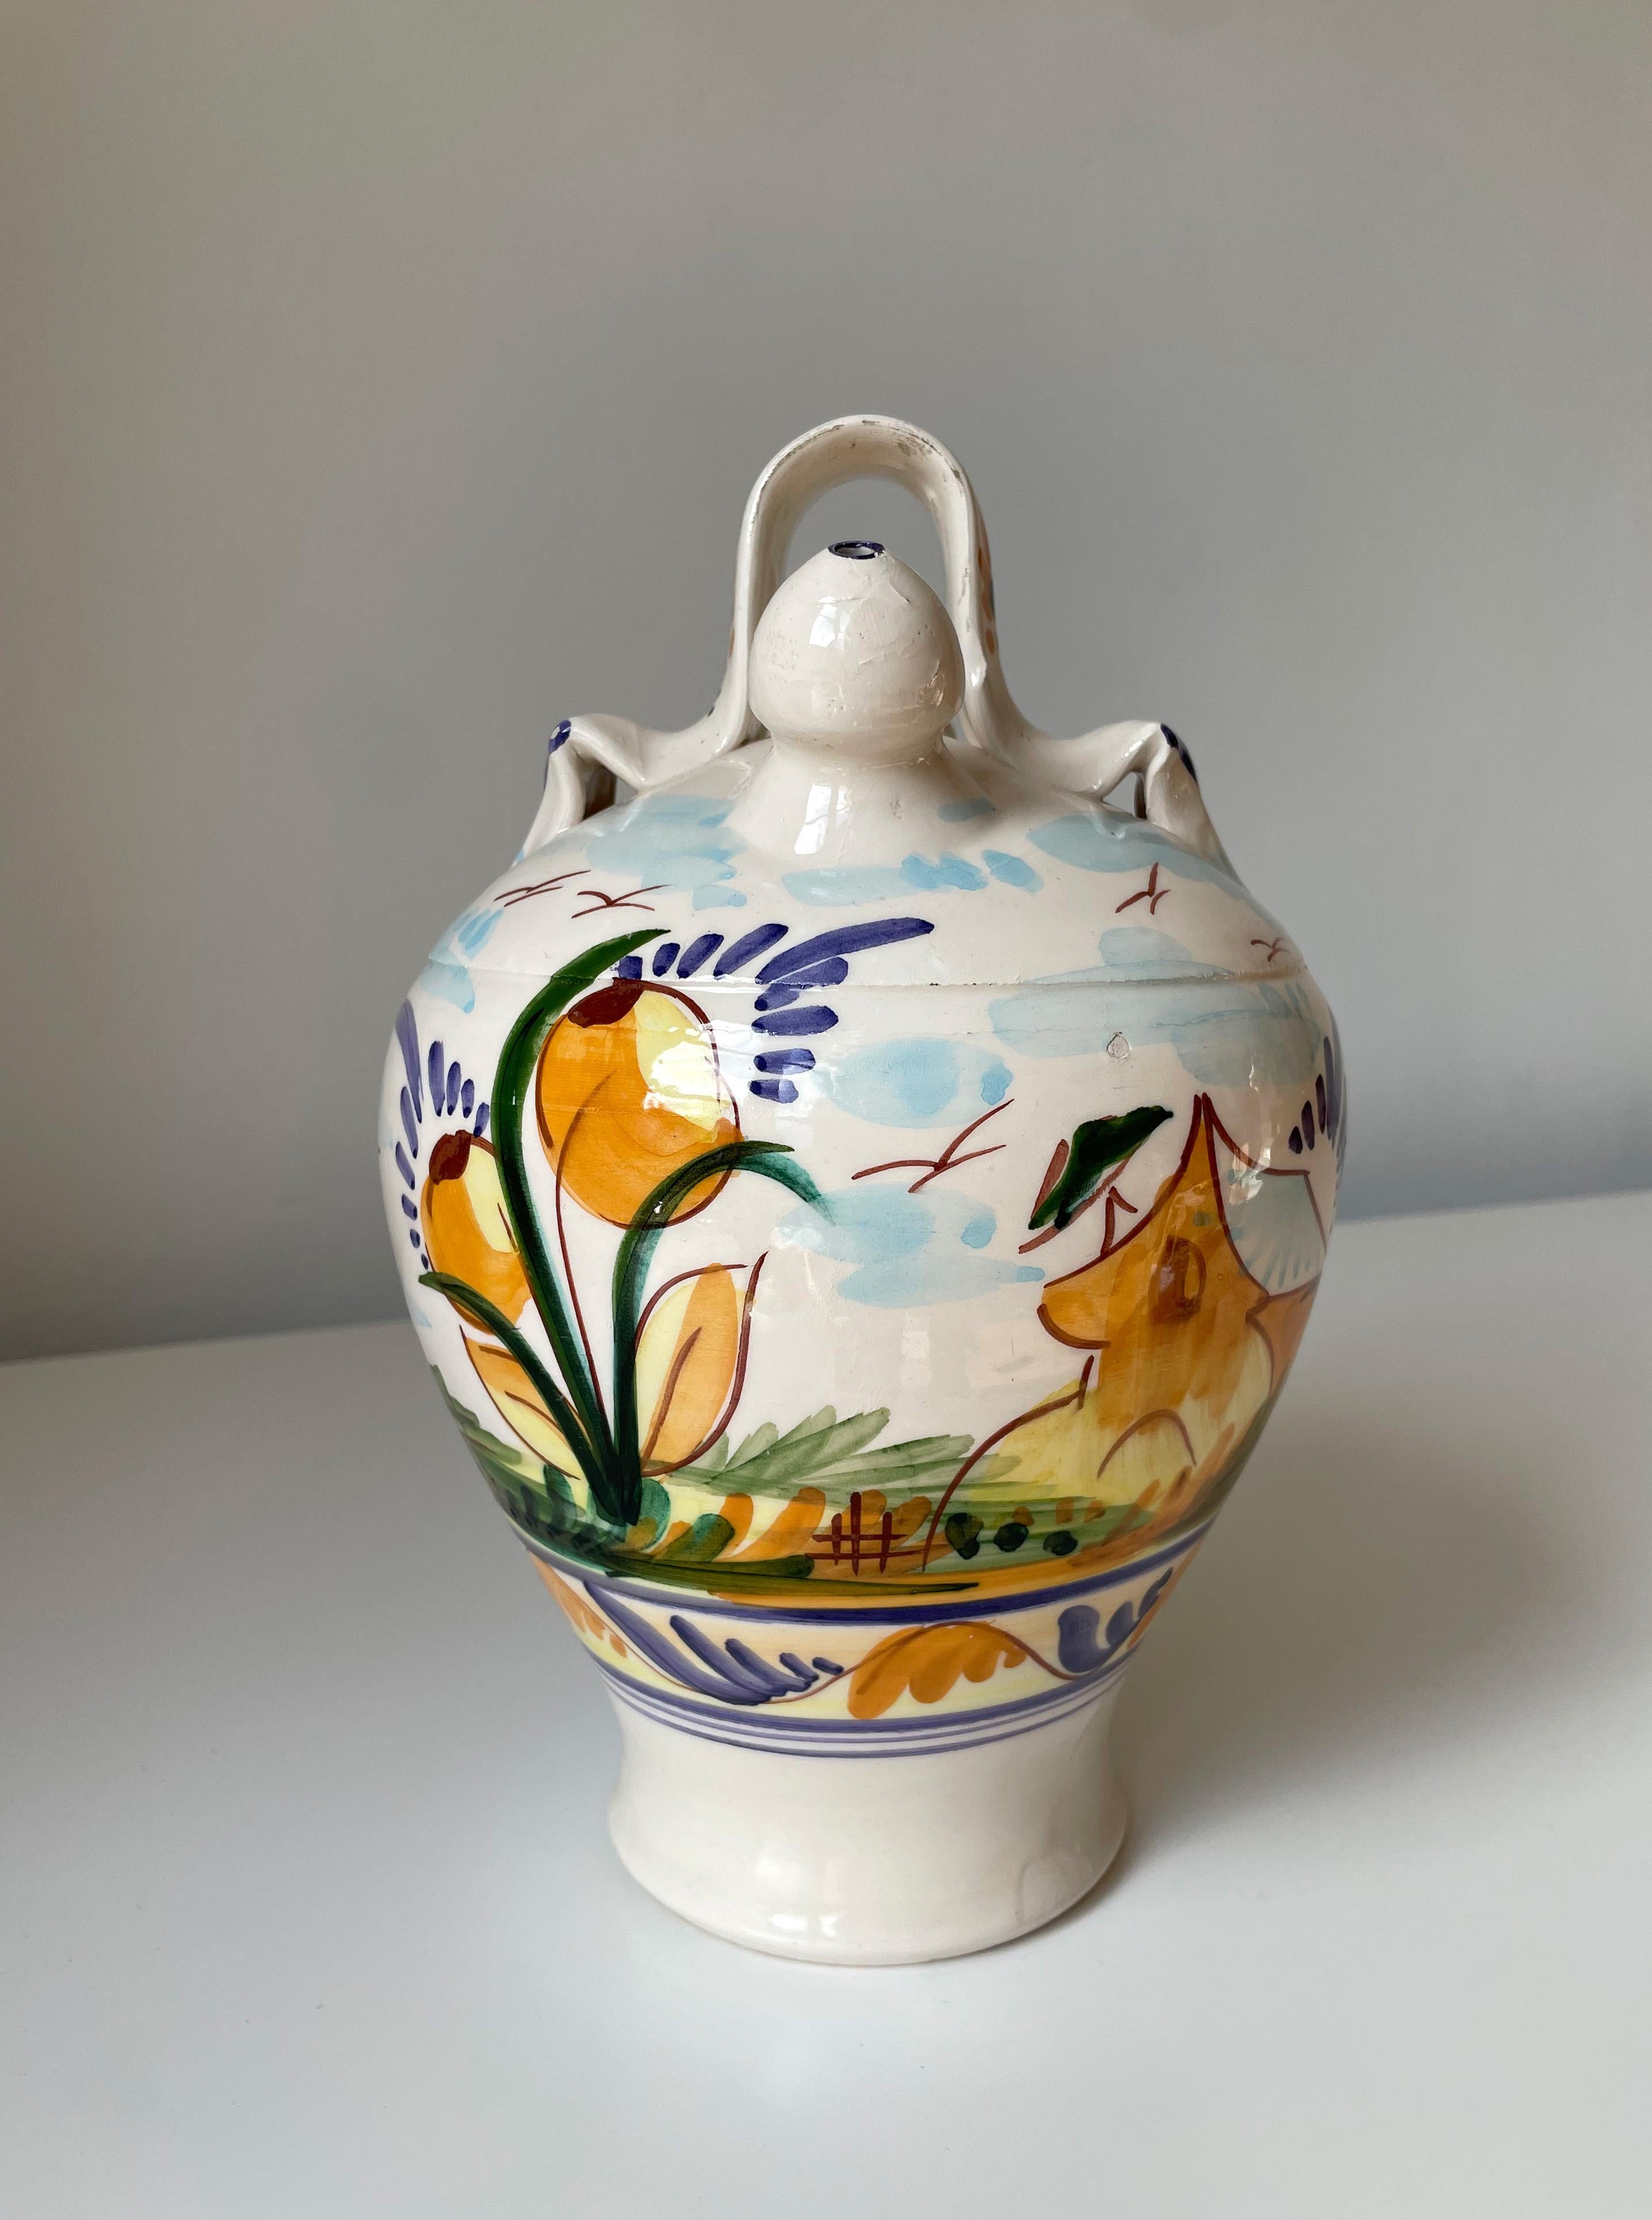 20th Century Italian Hand Painted Ceramic Bottle Pitcher Vase, 1960s For Sale